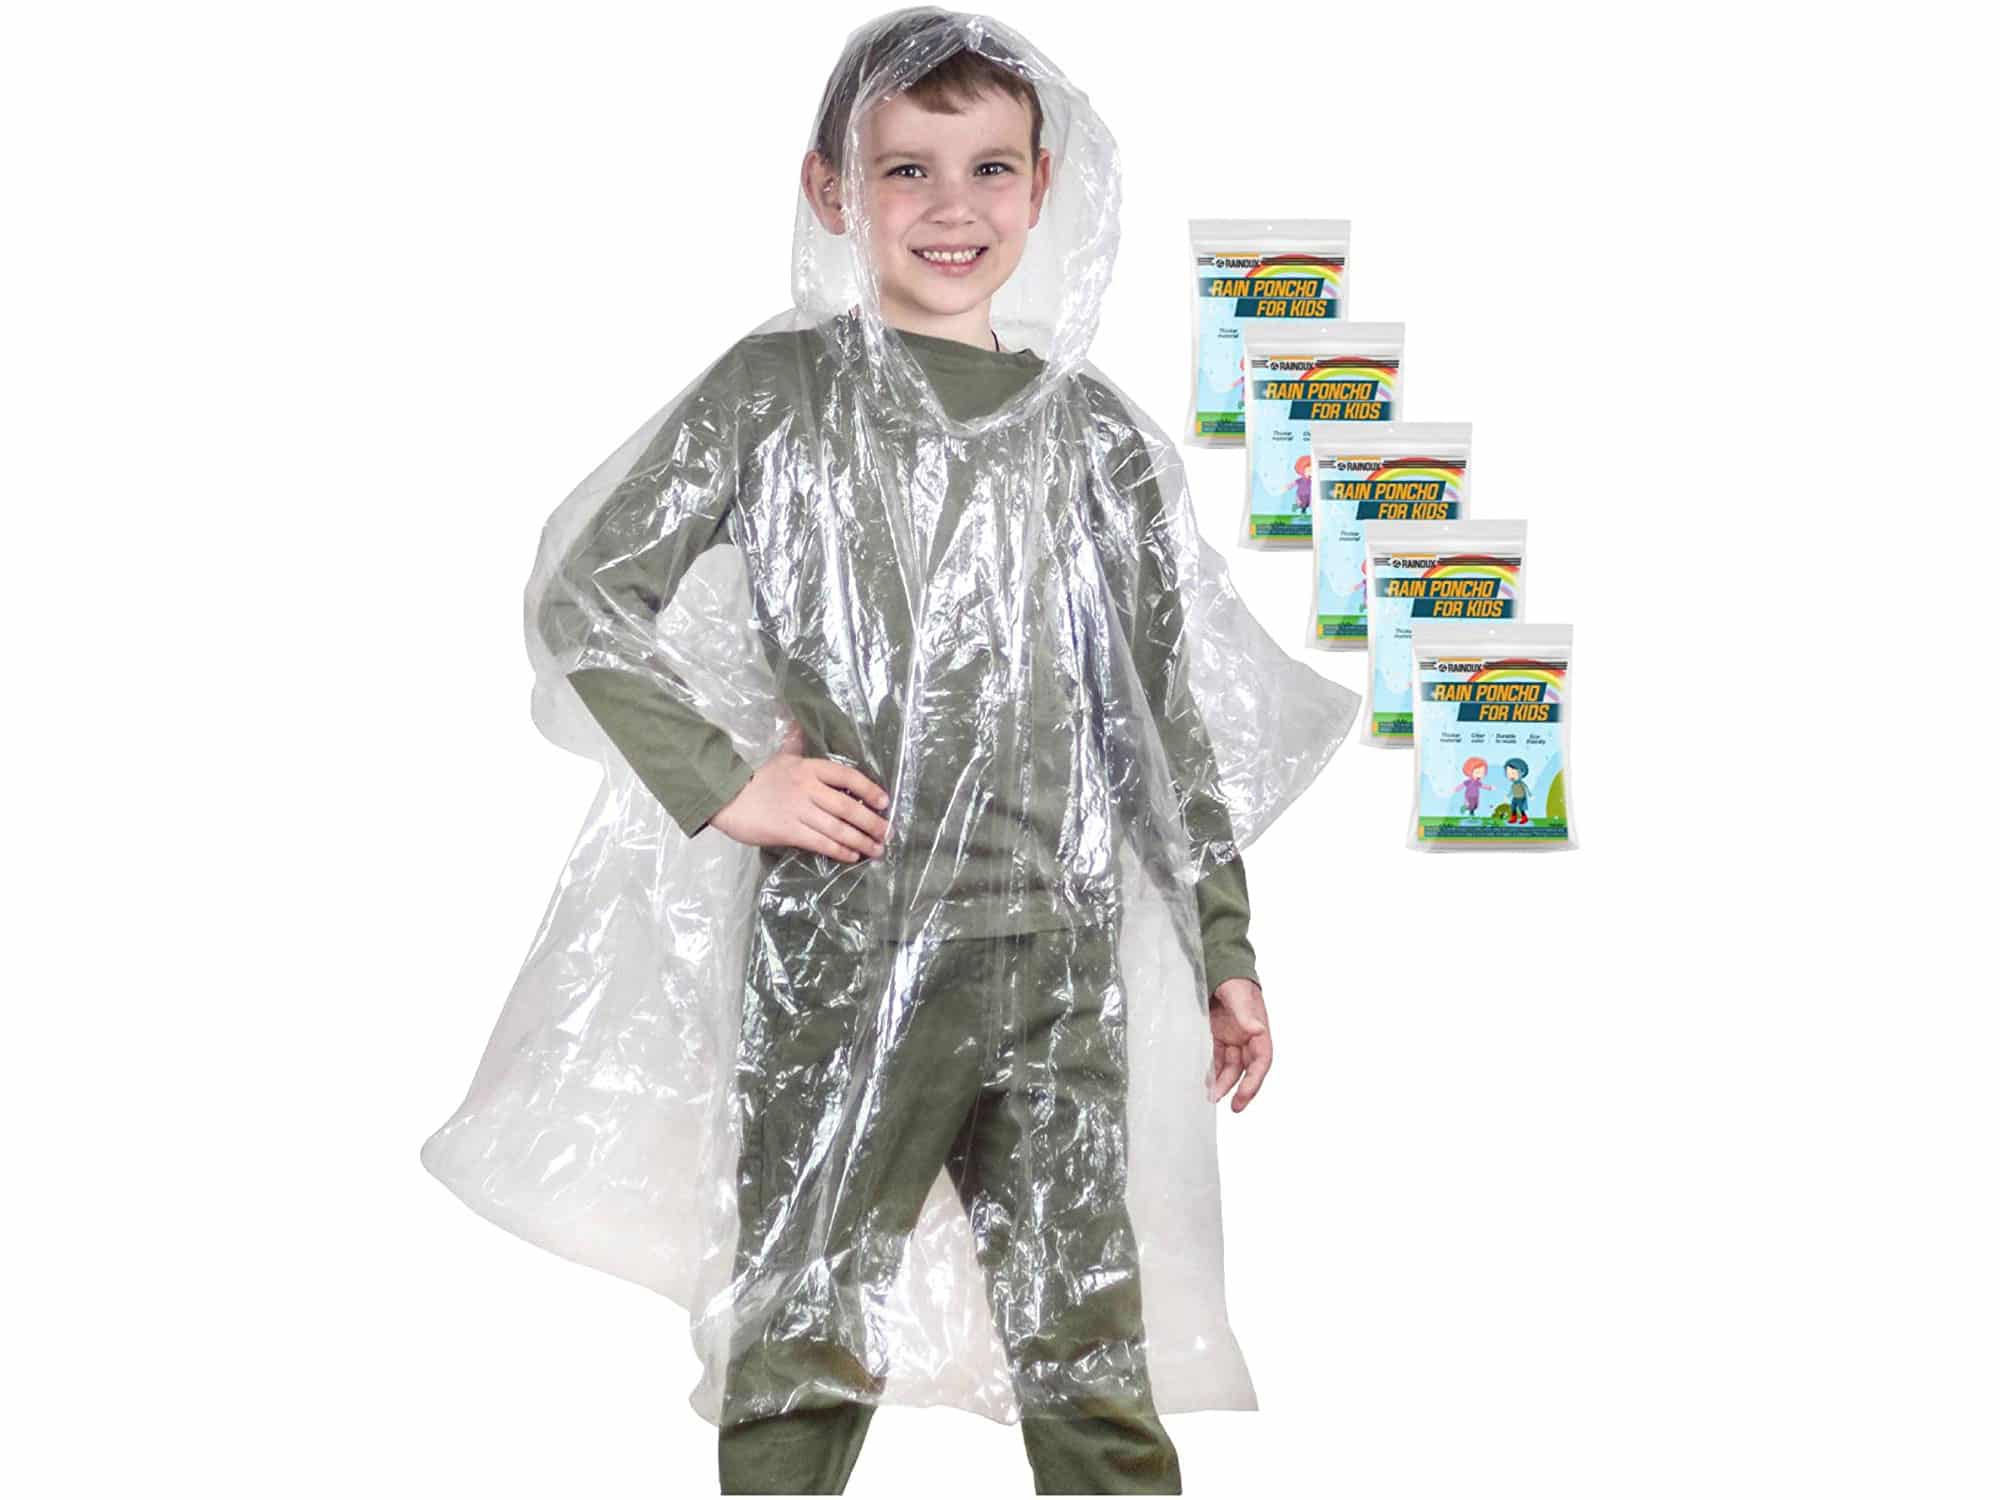 Disposable Rain Ponchos for Adults / Kids - 5 Pack Emergency Ponchos with Hood